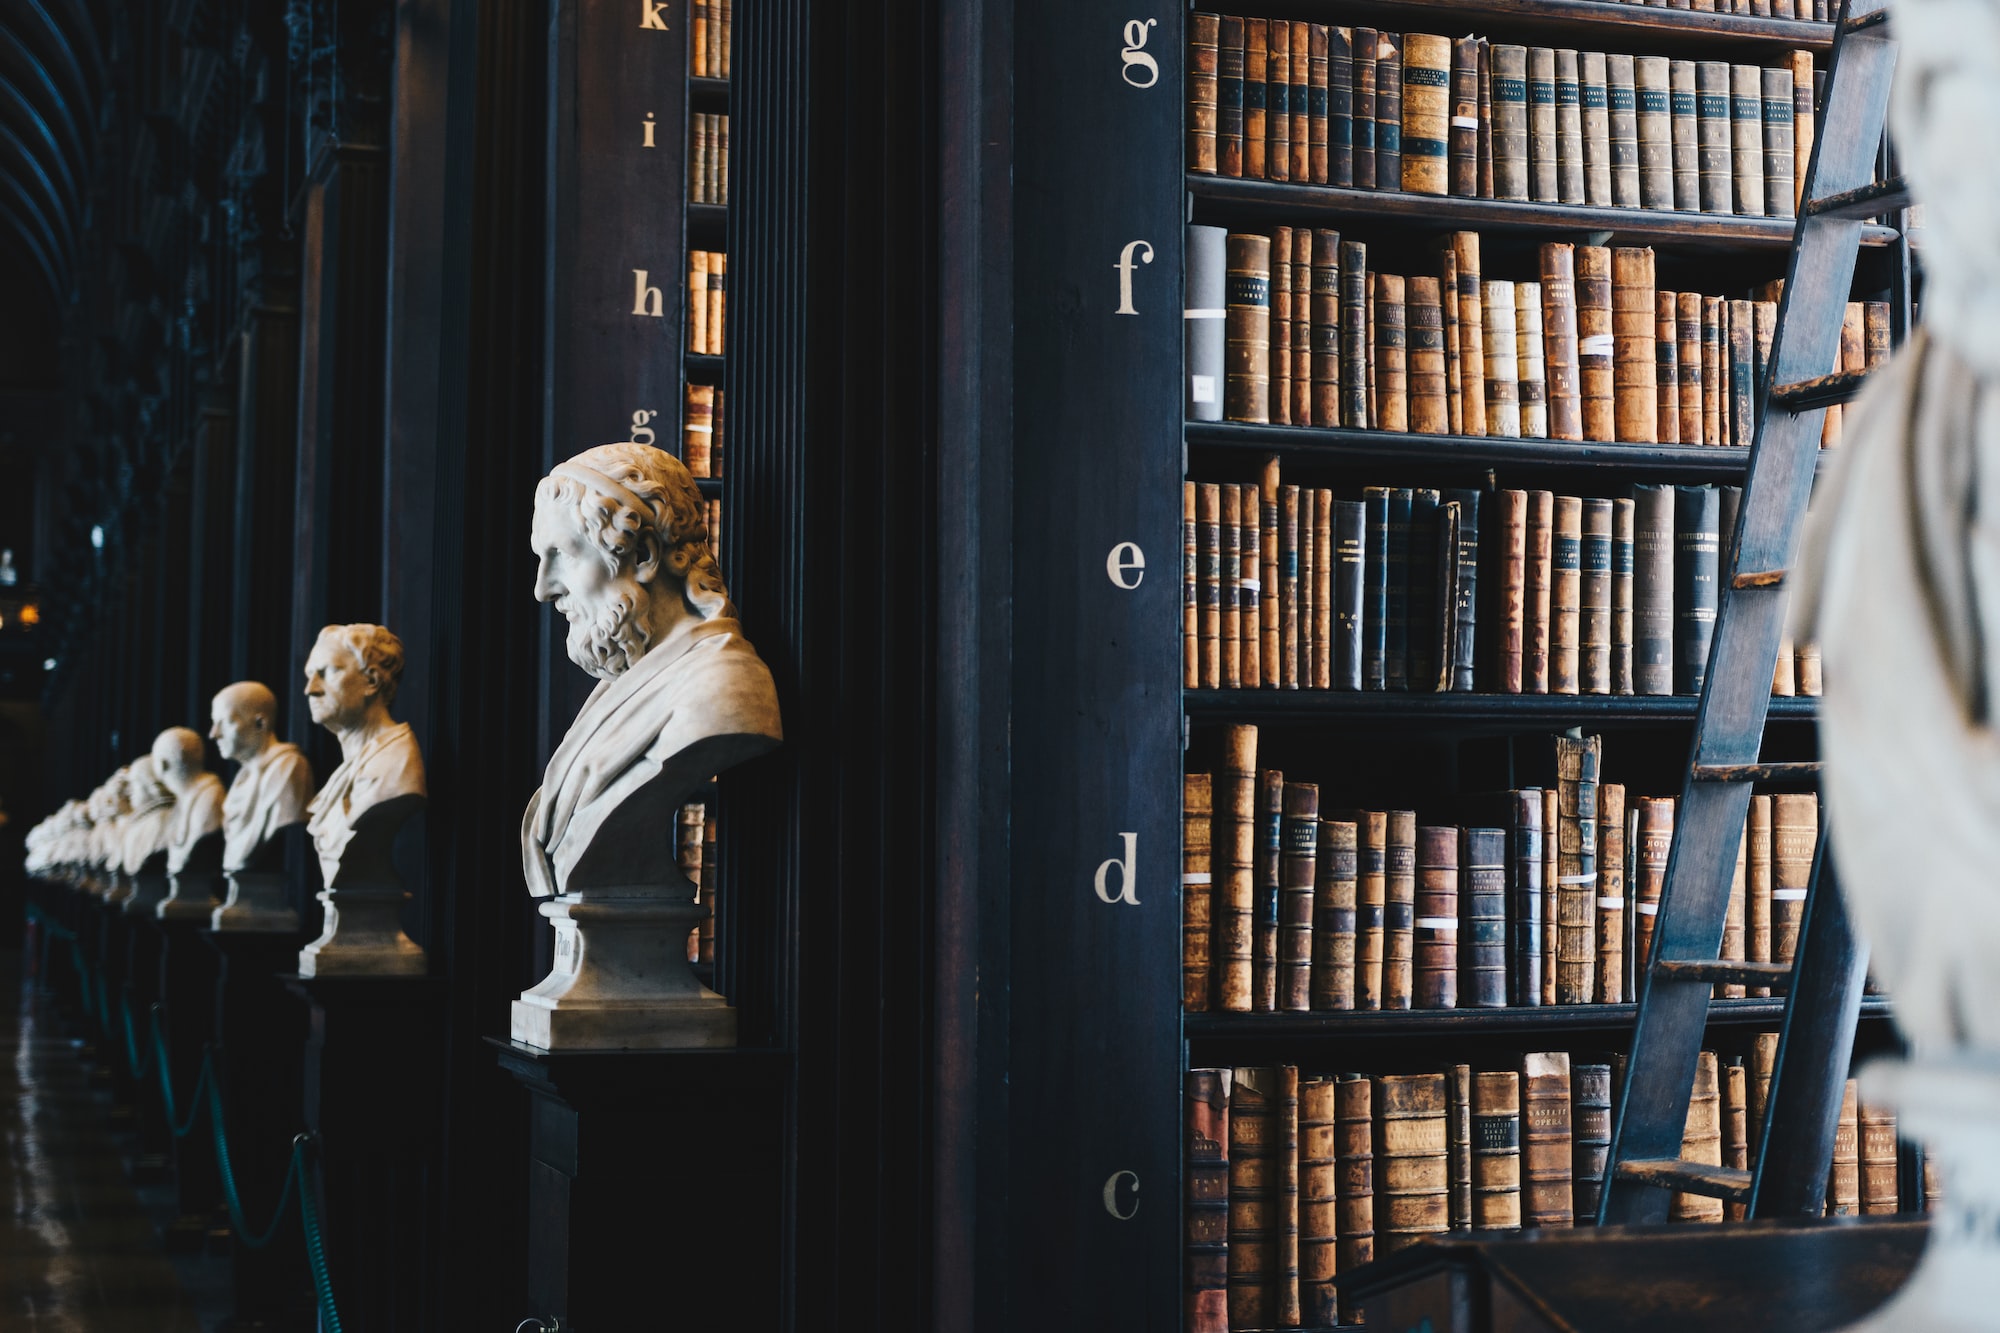 An ornate library with many busts in a row